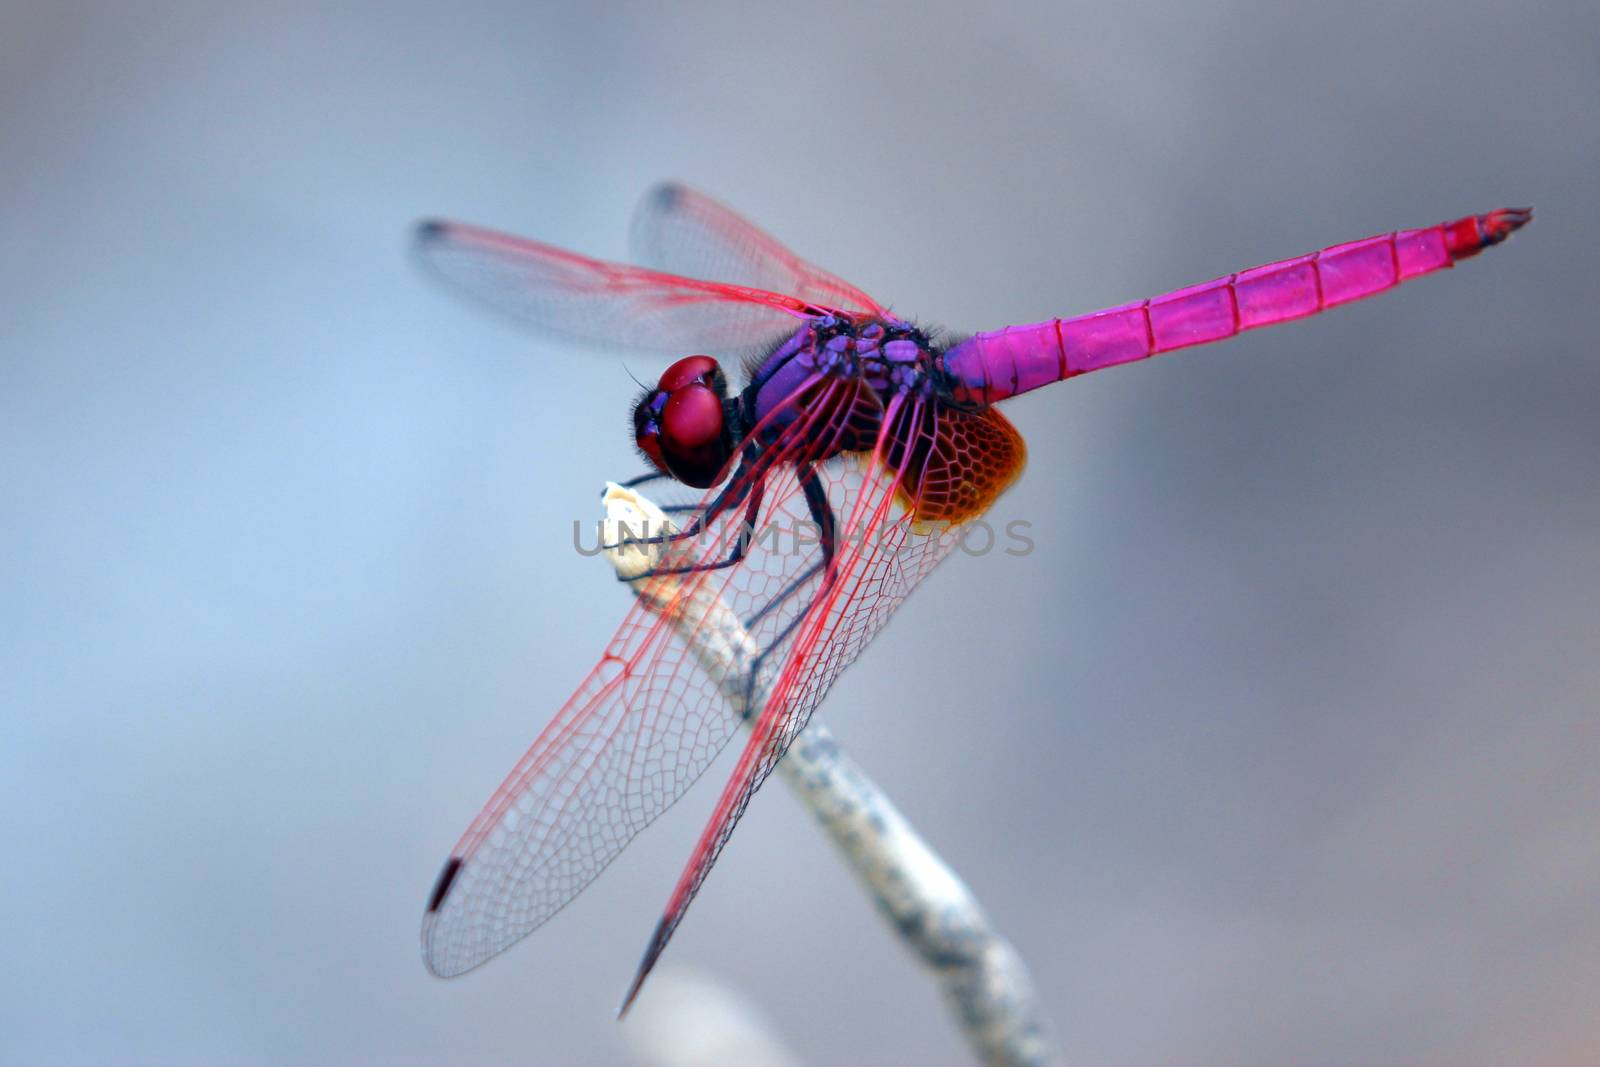 Image of dragonfly perched on a tree branch